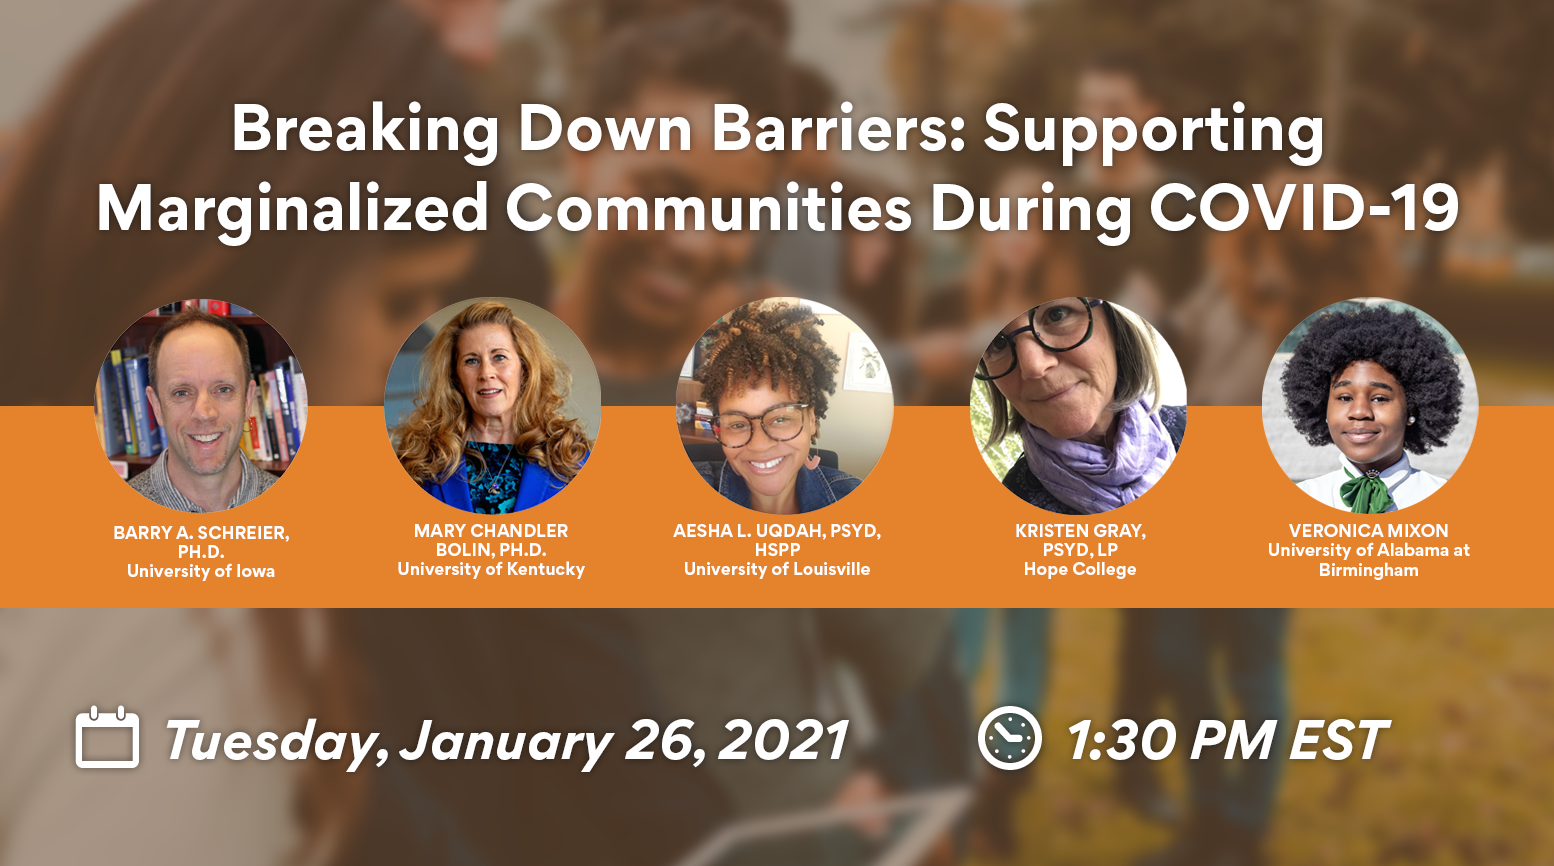 Breaking Down Barriers: Supporting Marginalized Communities During COVID-19